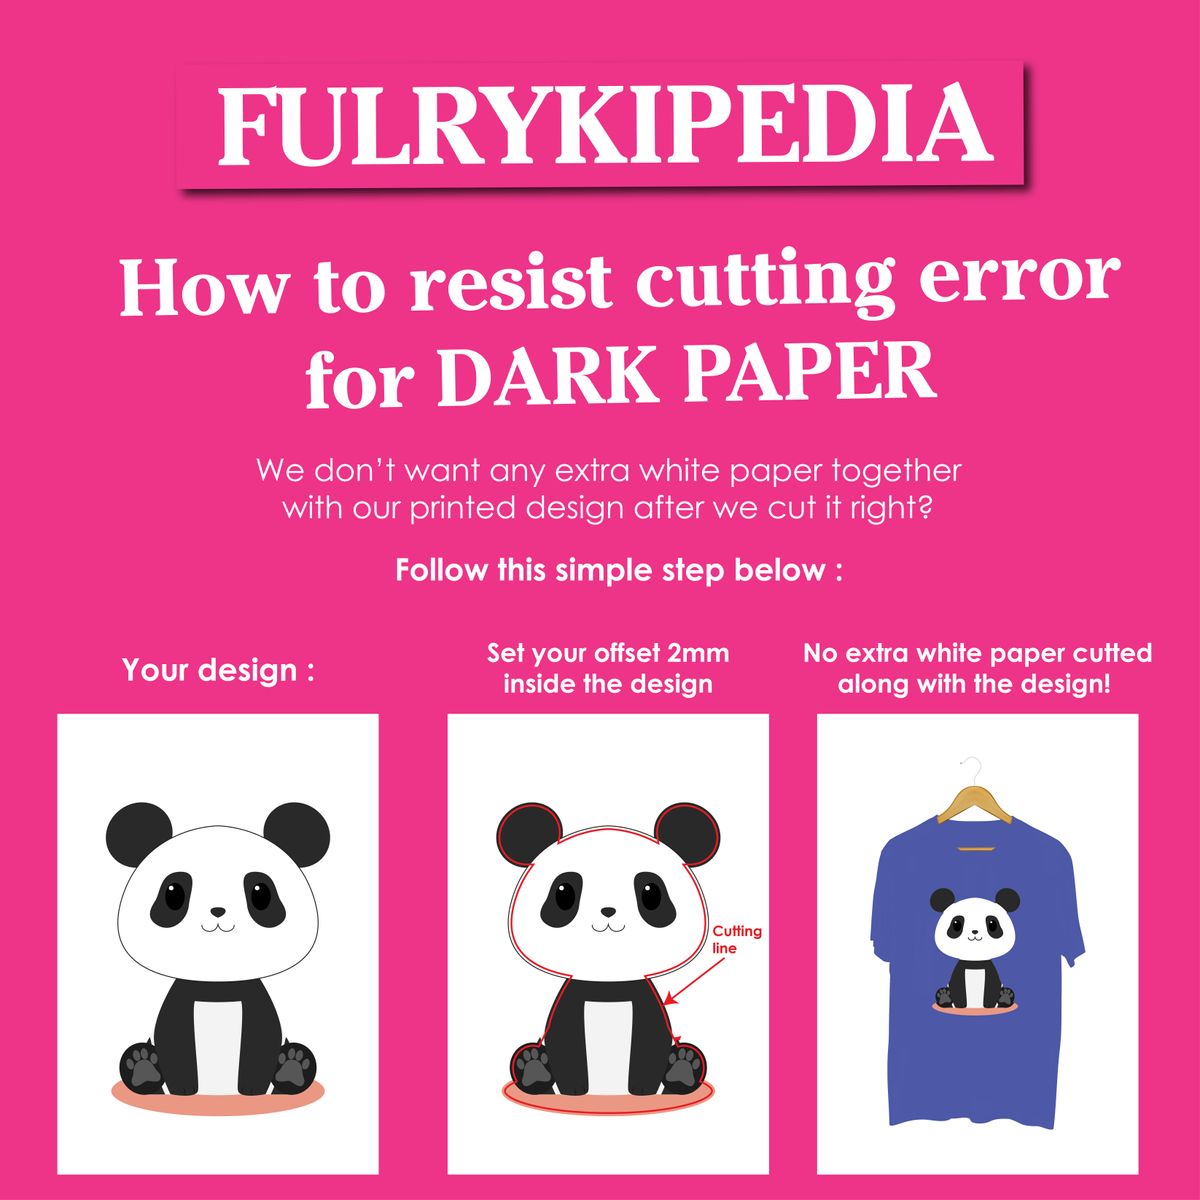 How to resist cutting error for Dark Paper